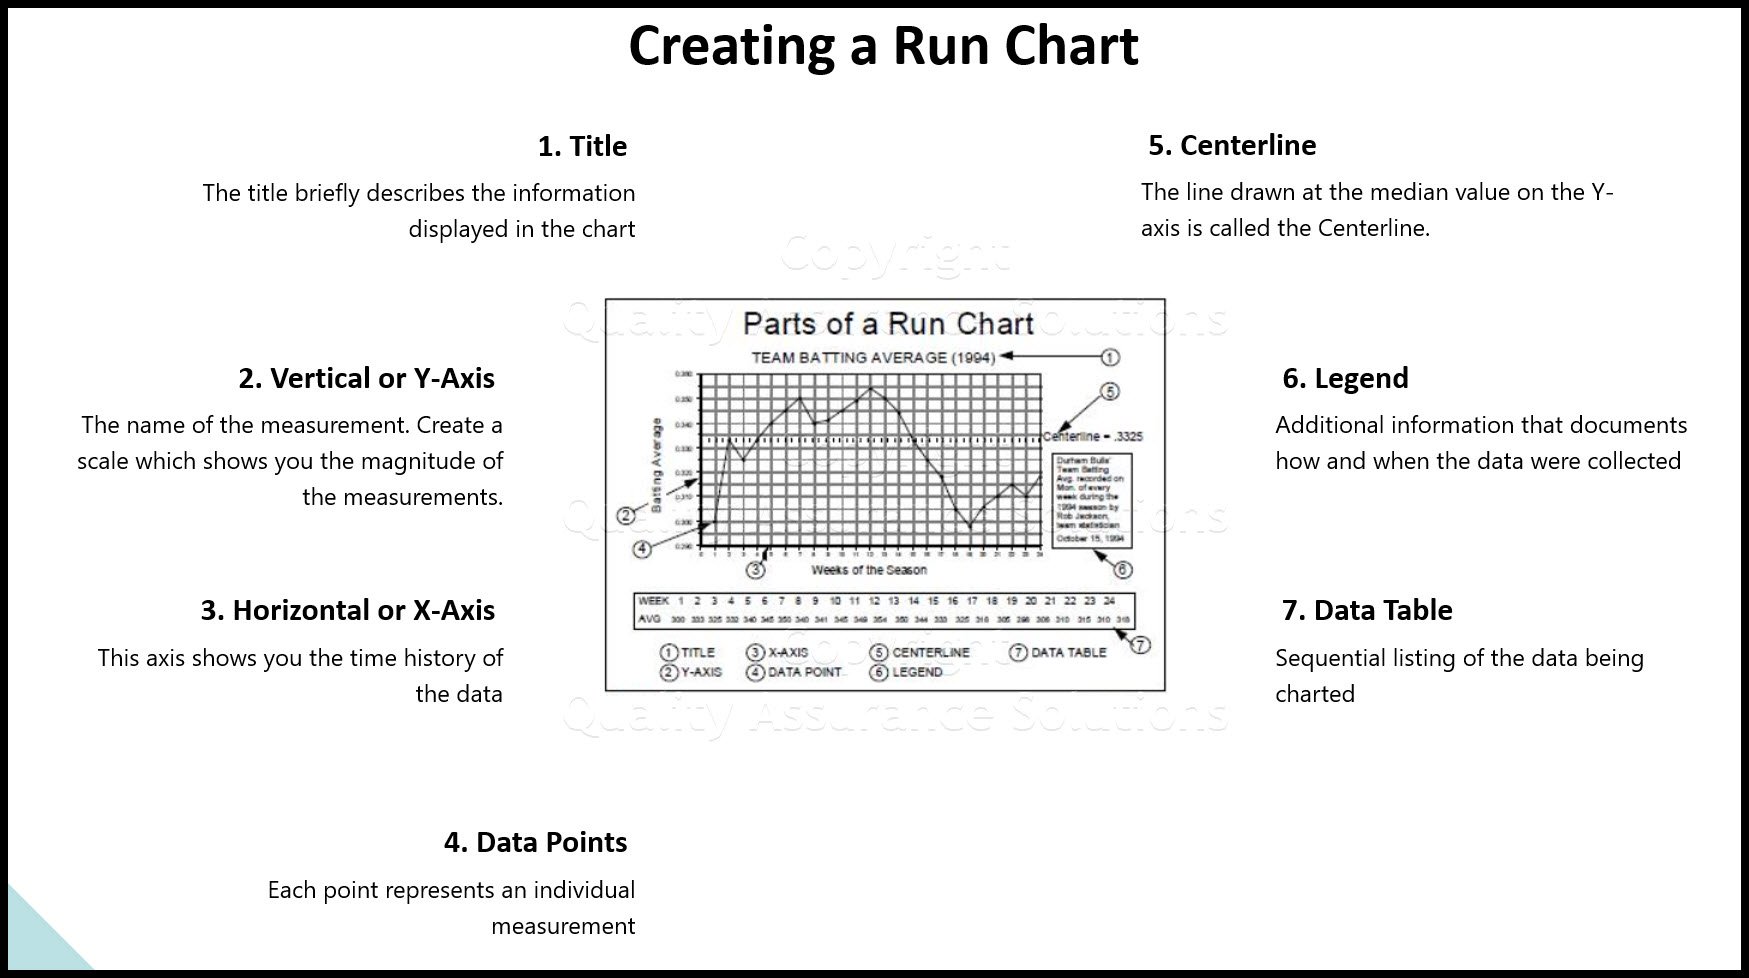 A Run Chart displays the process performance over time. It is a line graph of data points plotted in chronological order. Learn more!